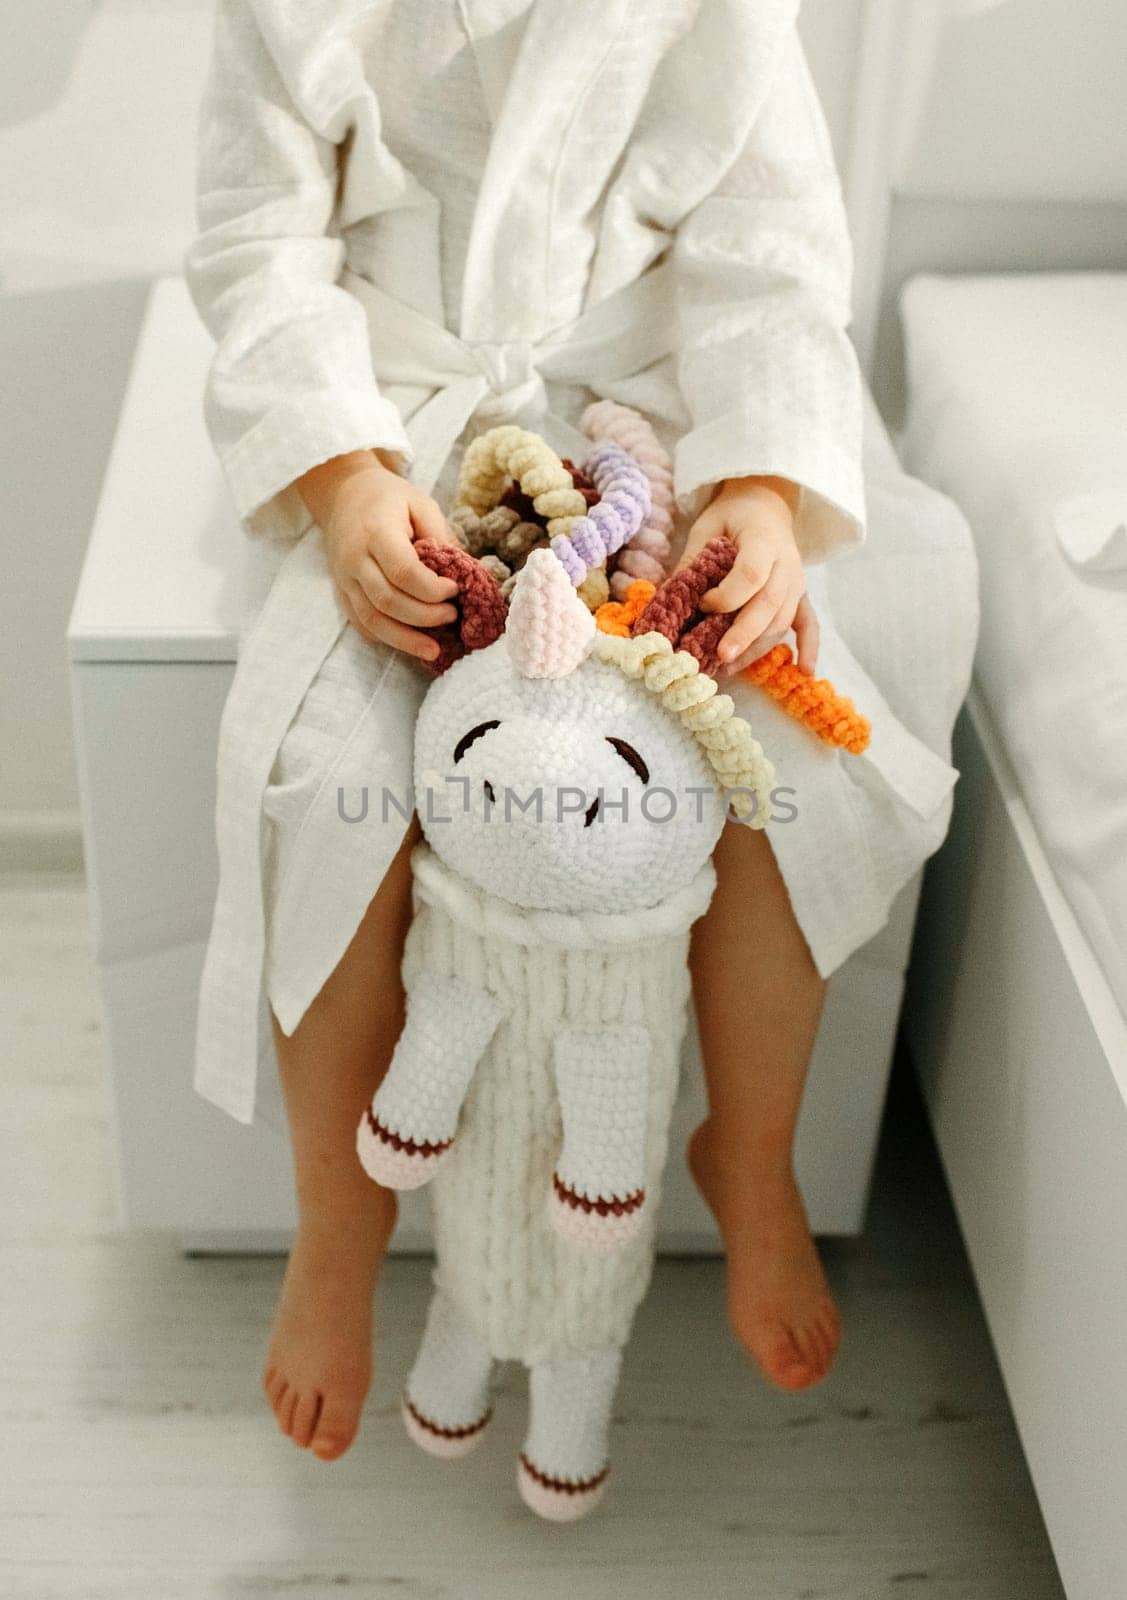 A girl in a bathrobe plays with a knitted unicorn by Sd28DimoN_1976